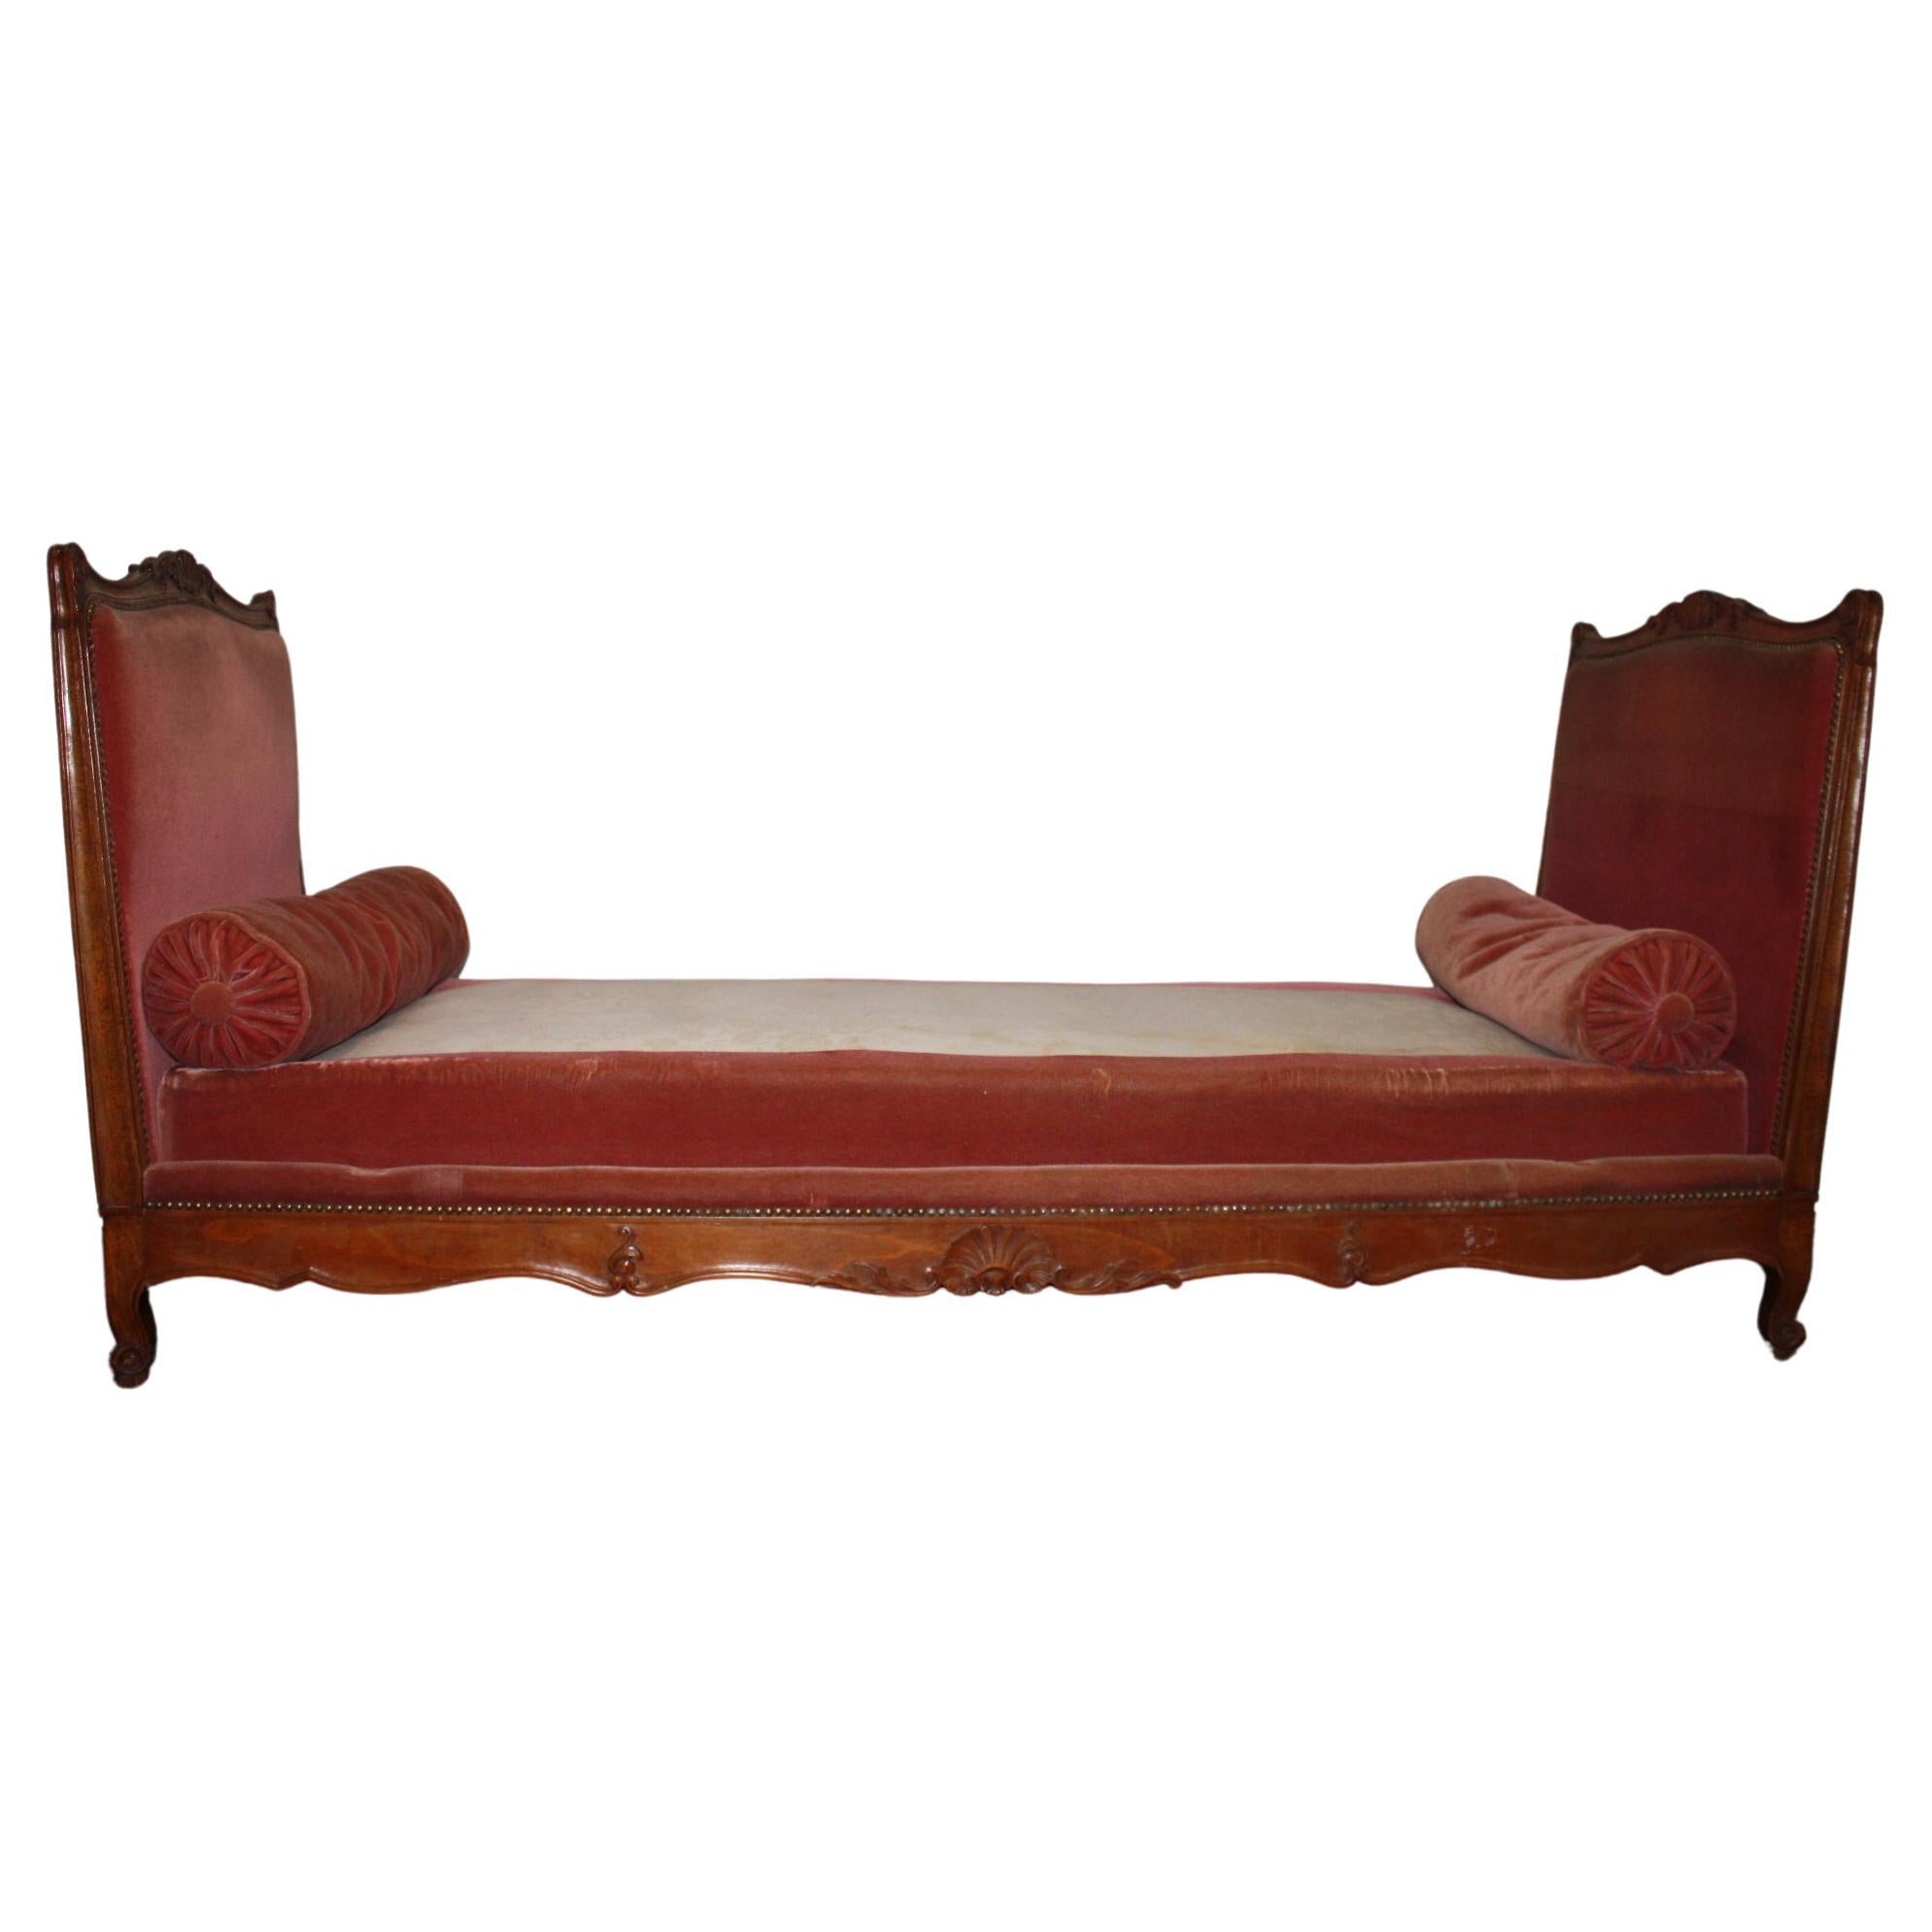 This Daybed is nicely carved garnished with a red velvet fabric. Easy to place anywhere at home.